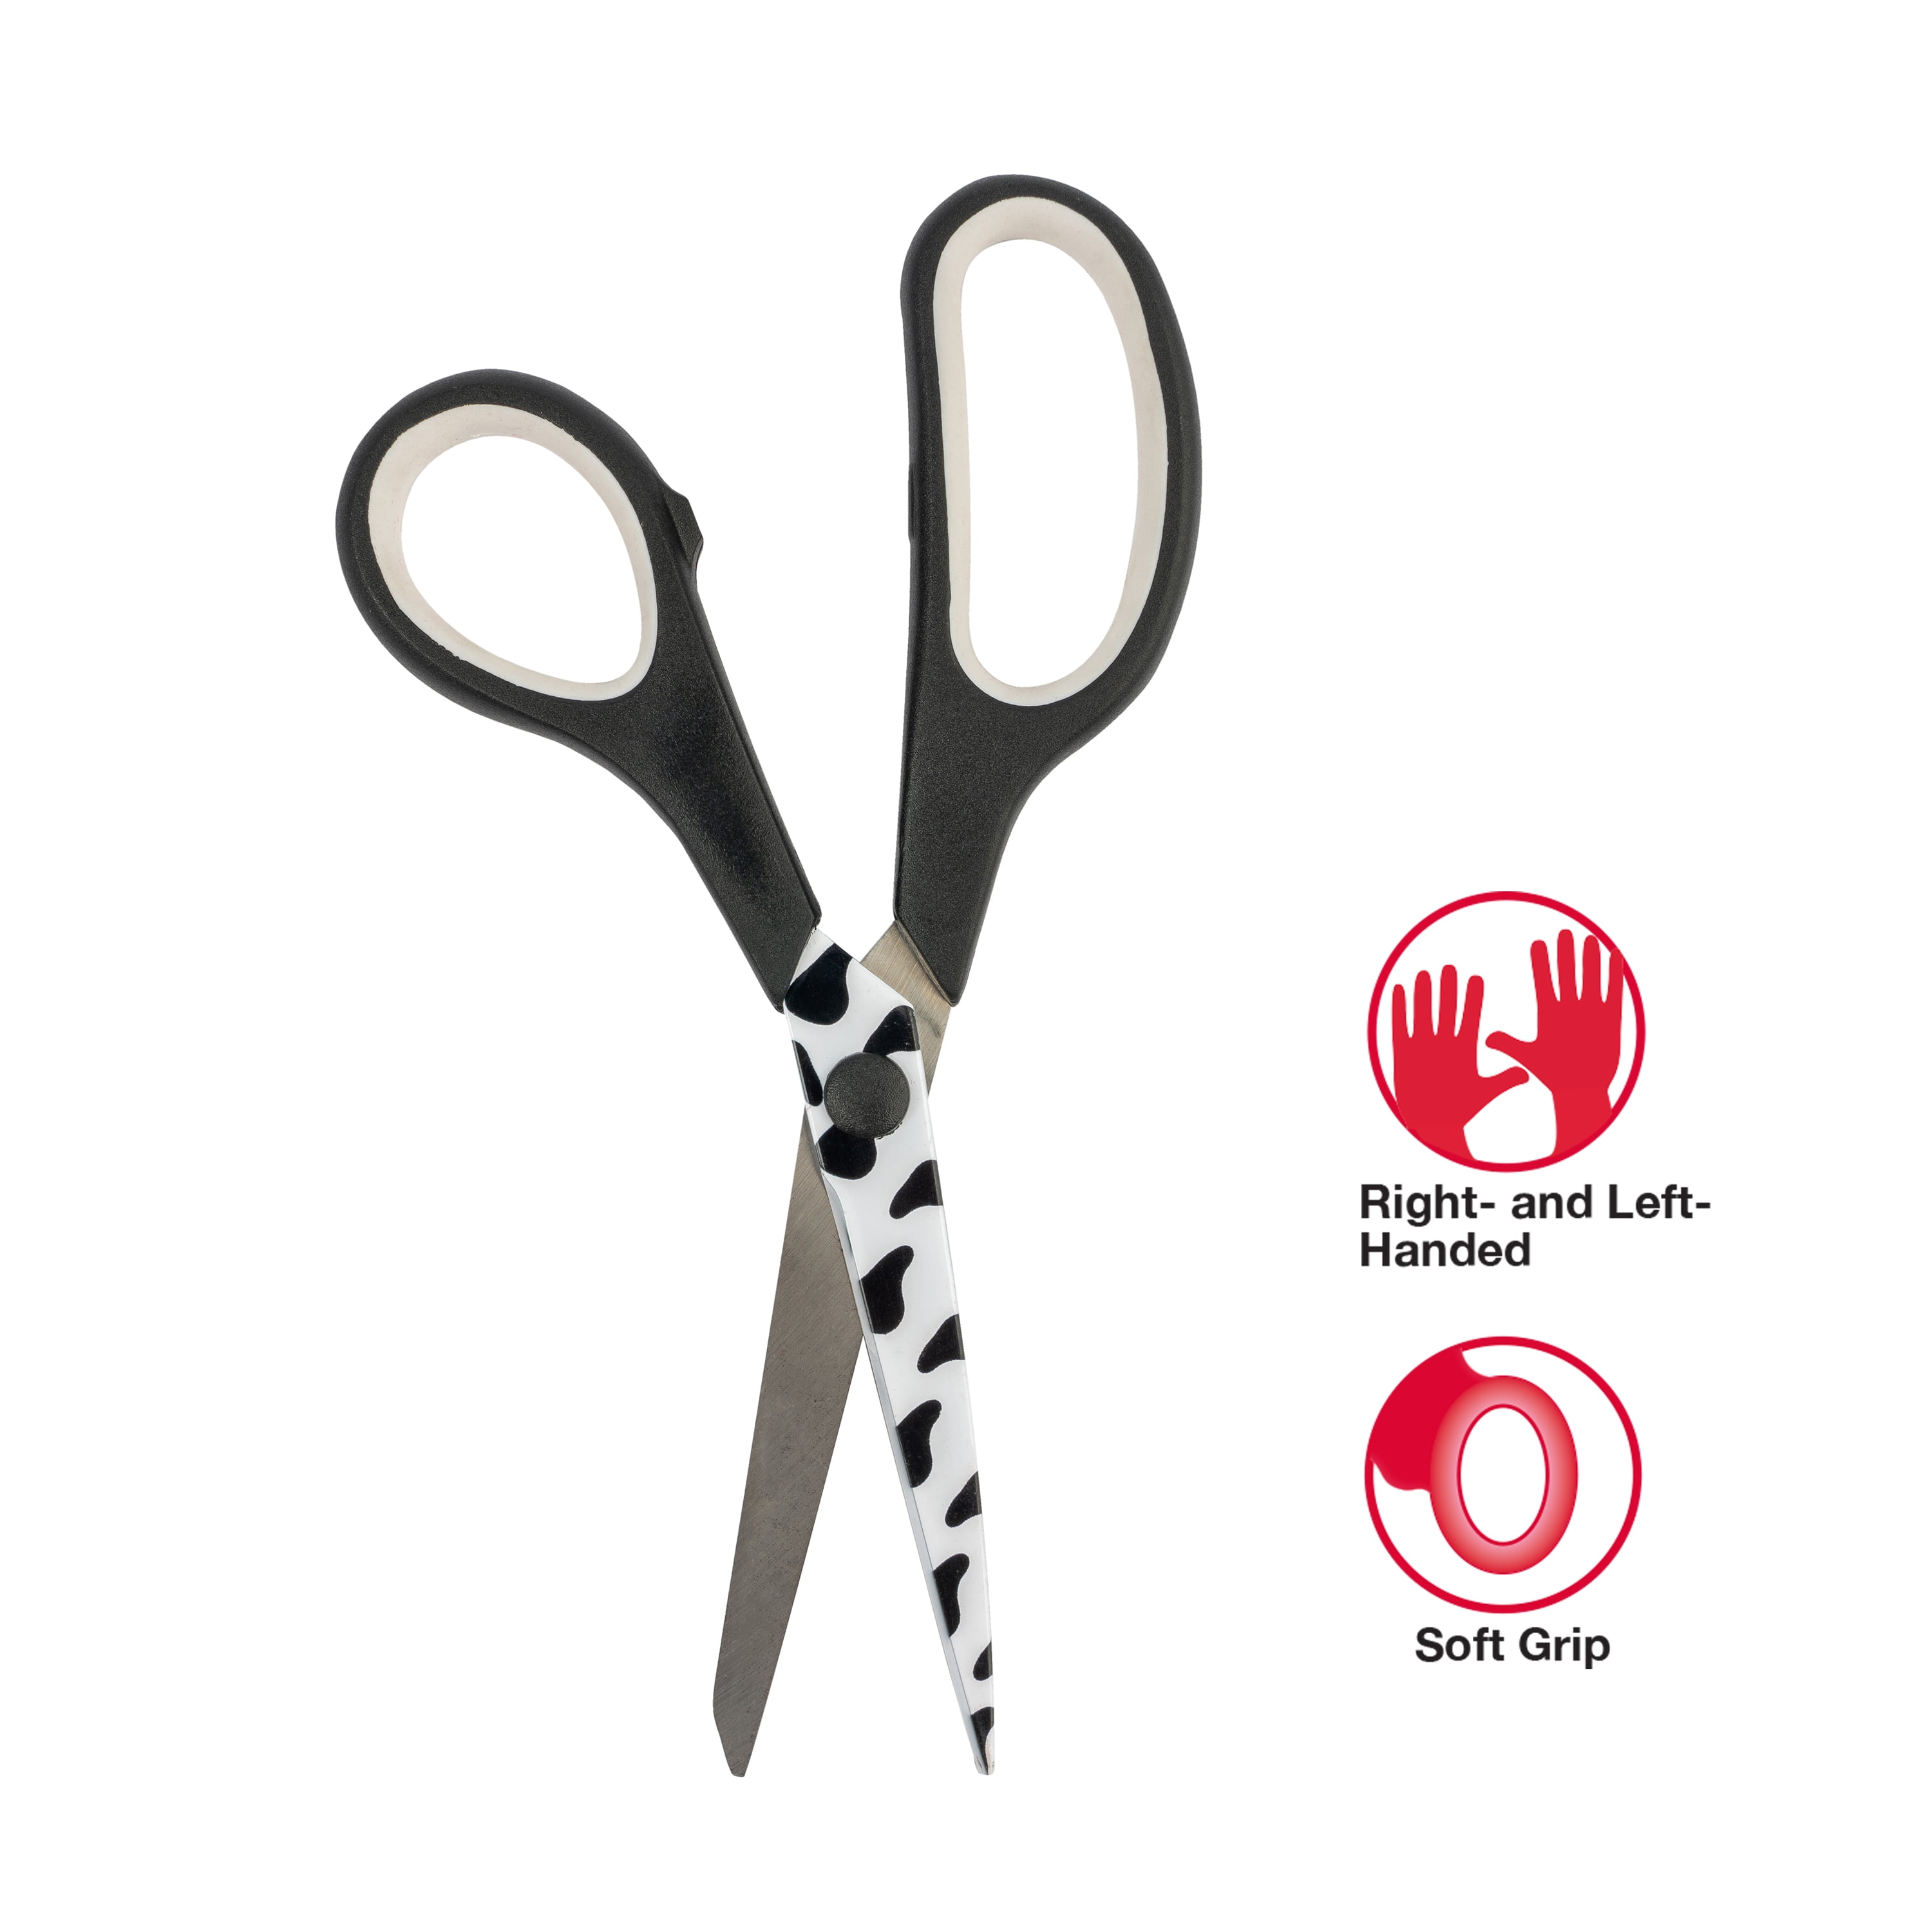 Left And Right Handed Scissors #1 Metal Print by Science Photo